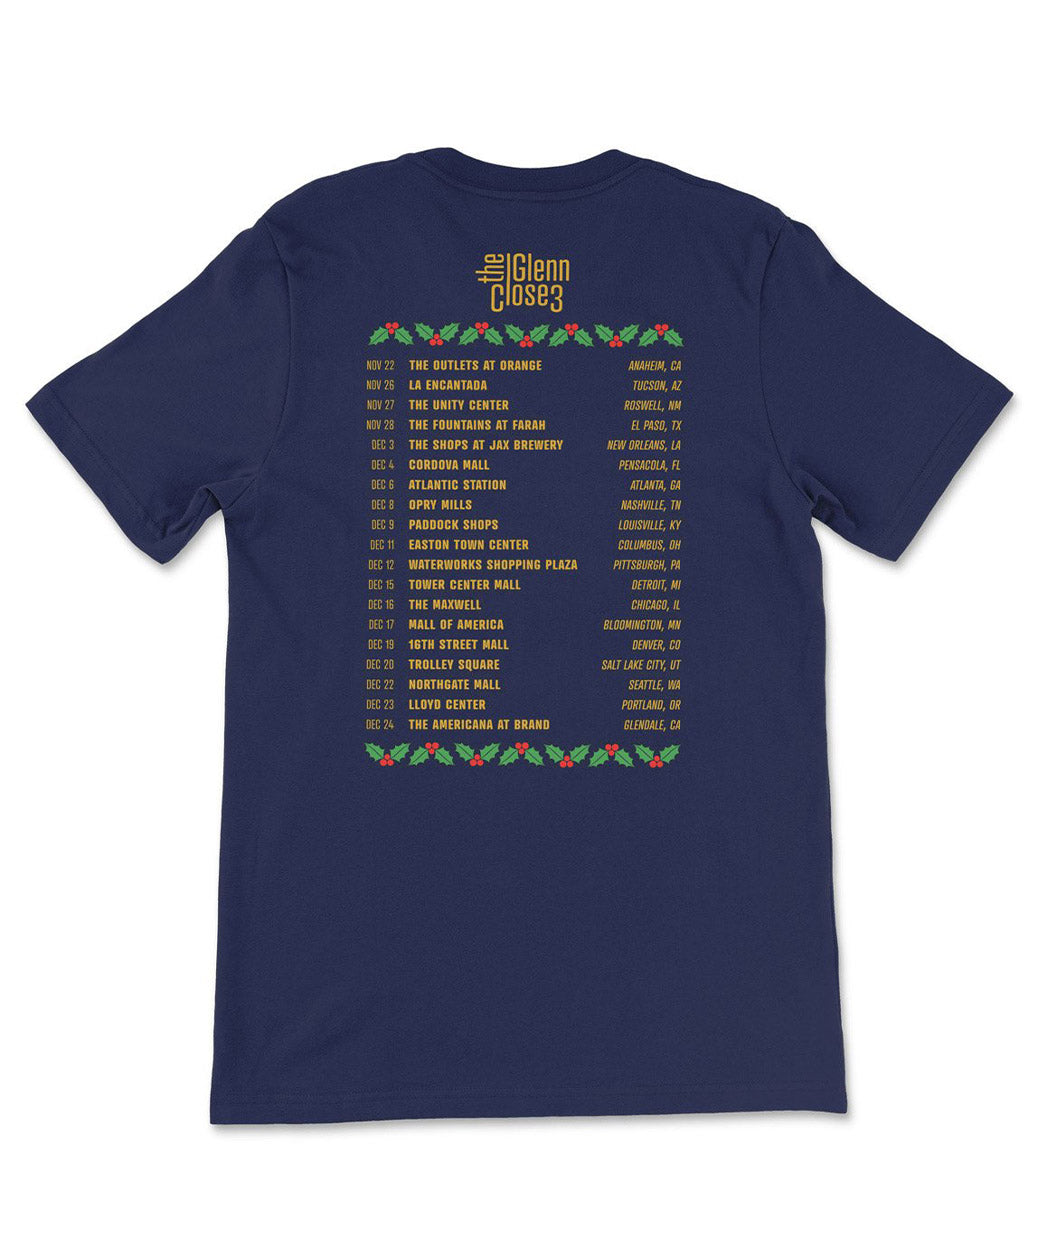 Back of navy blue t-shirt with yellow text of tour dates and locations with green and red screen printed holly and berries.